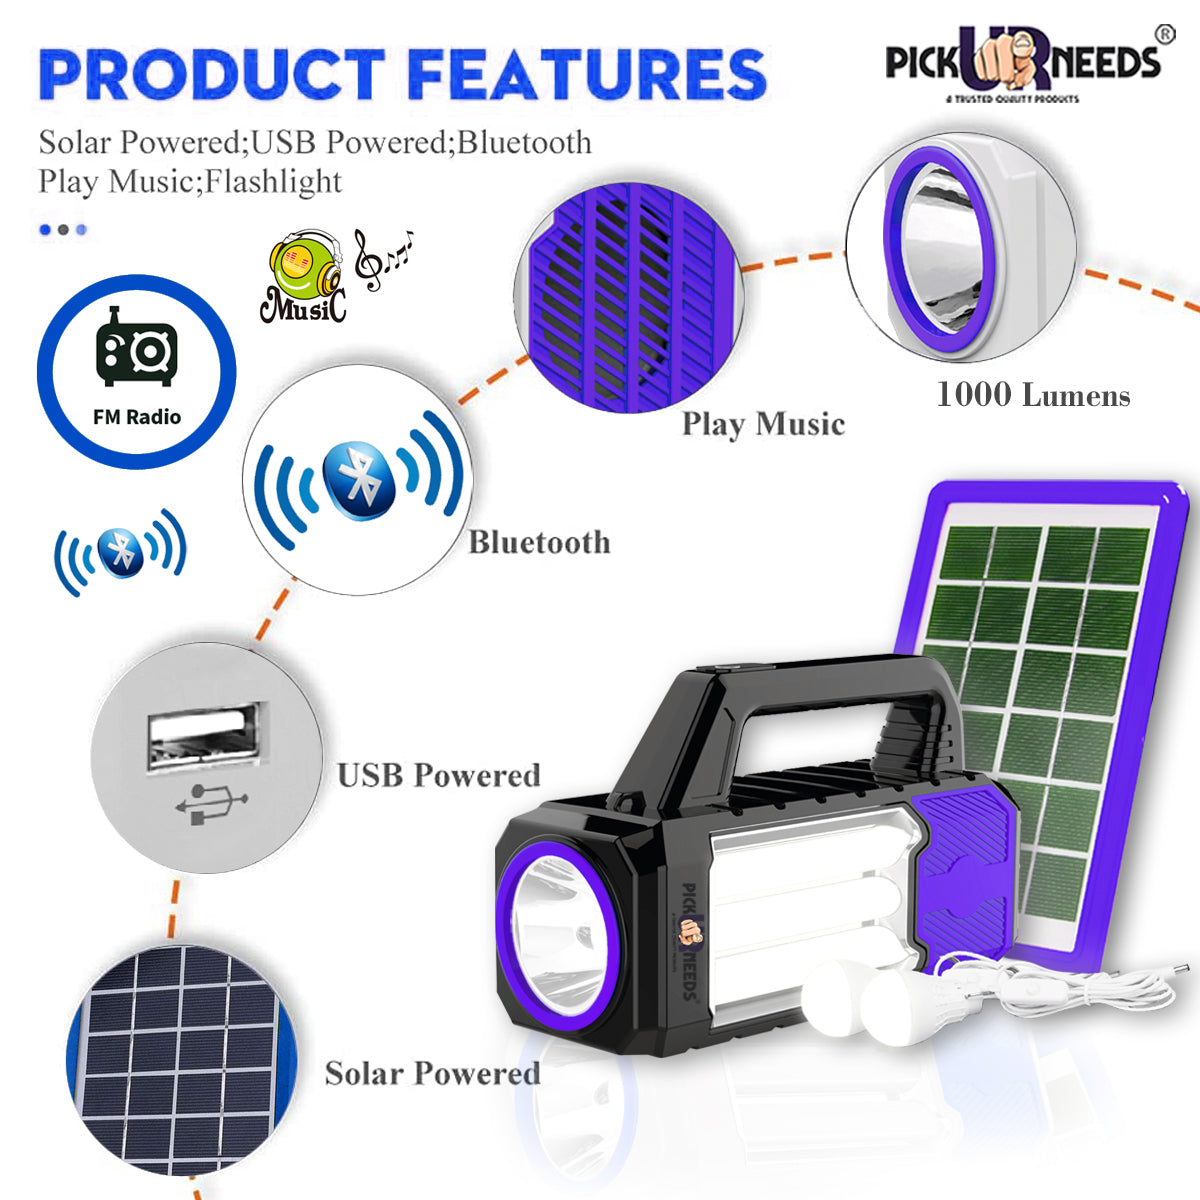 Pick Ur Needs Portable Multifunctional Solar Led Lighting 100W Tube & Music System Generator Power Bank Outlet Camping Emergency